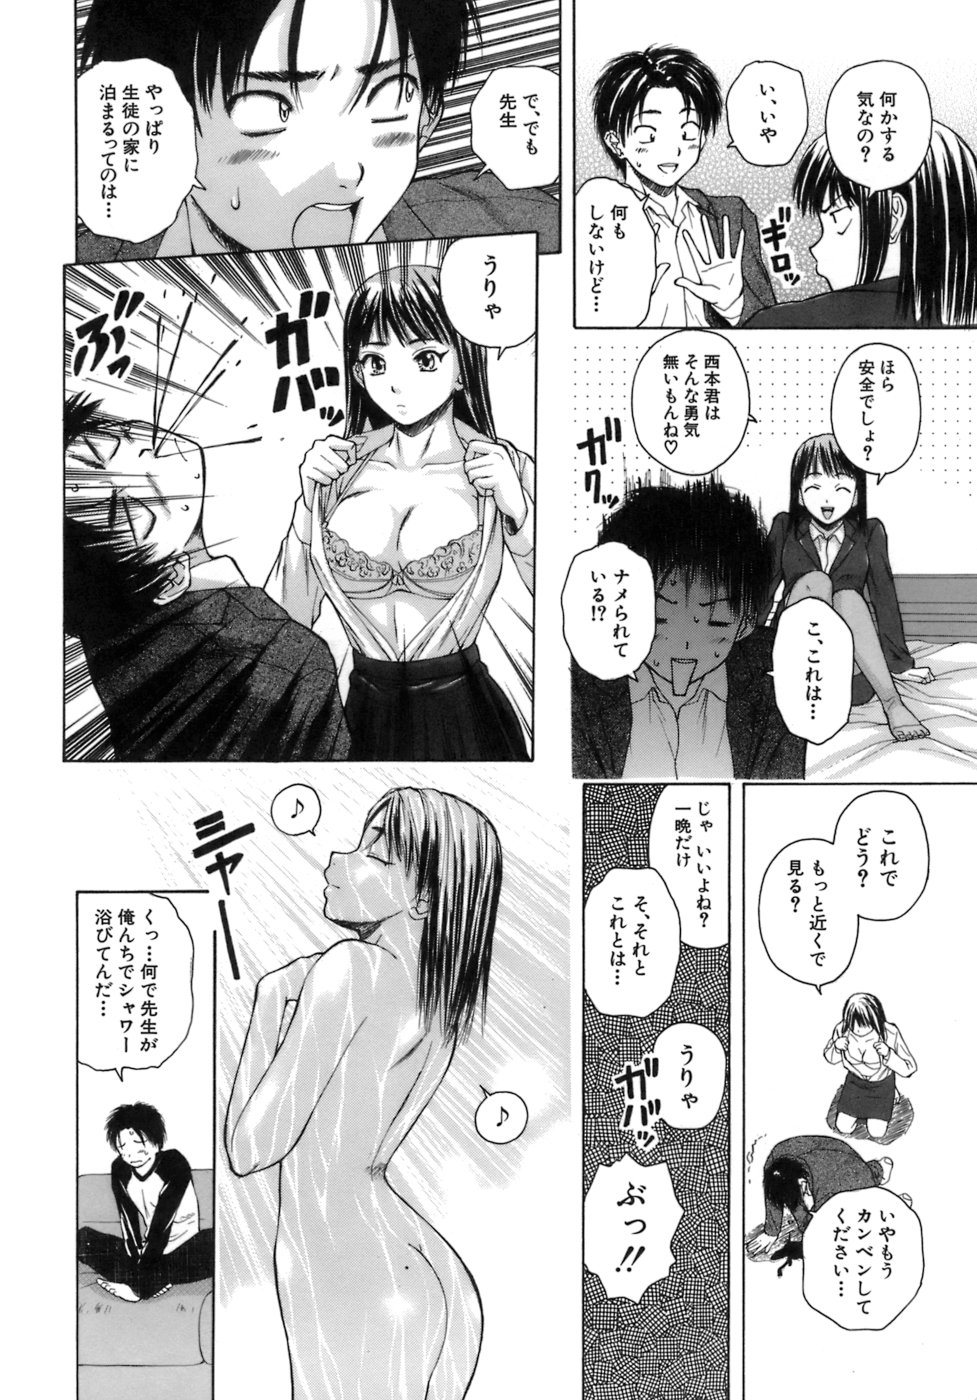 [Fuuga] Kyoushi to Seito to - Teacher and Student page 13 full